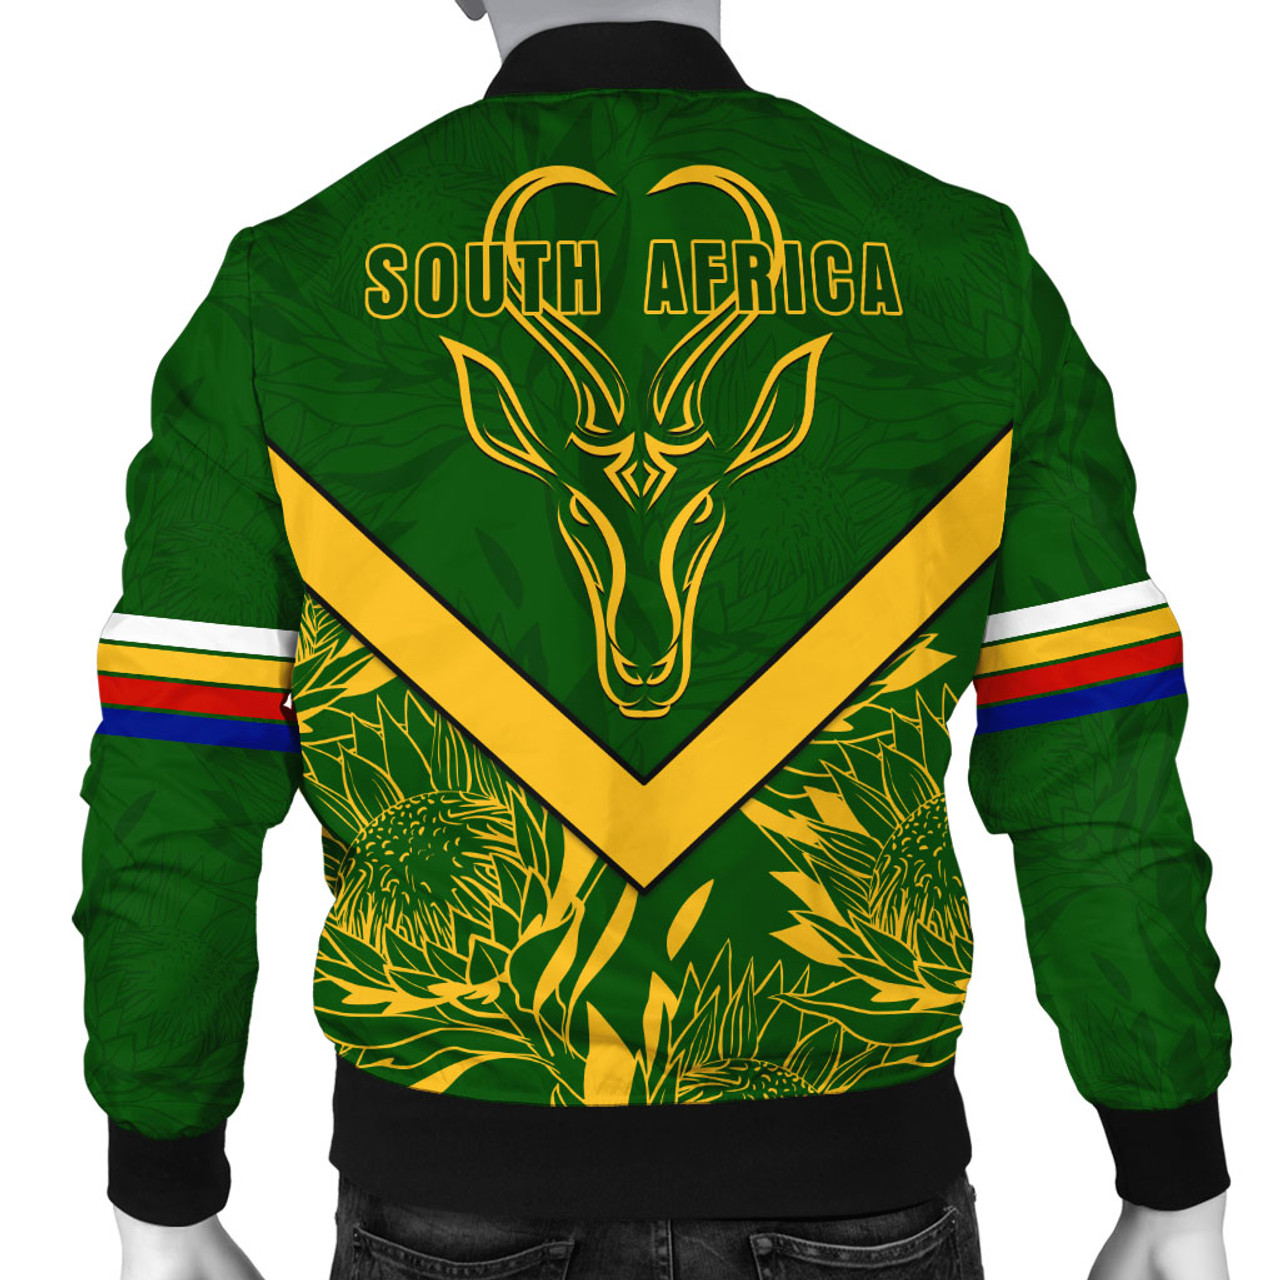 South Africa Bomber Jacket Pattern Protea Flower